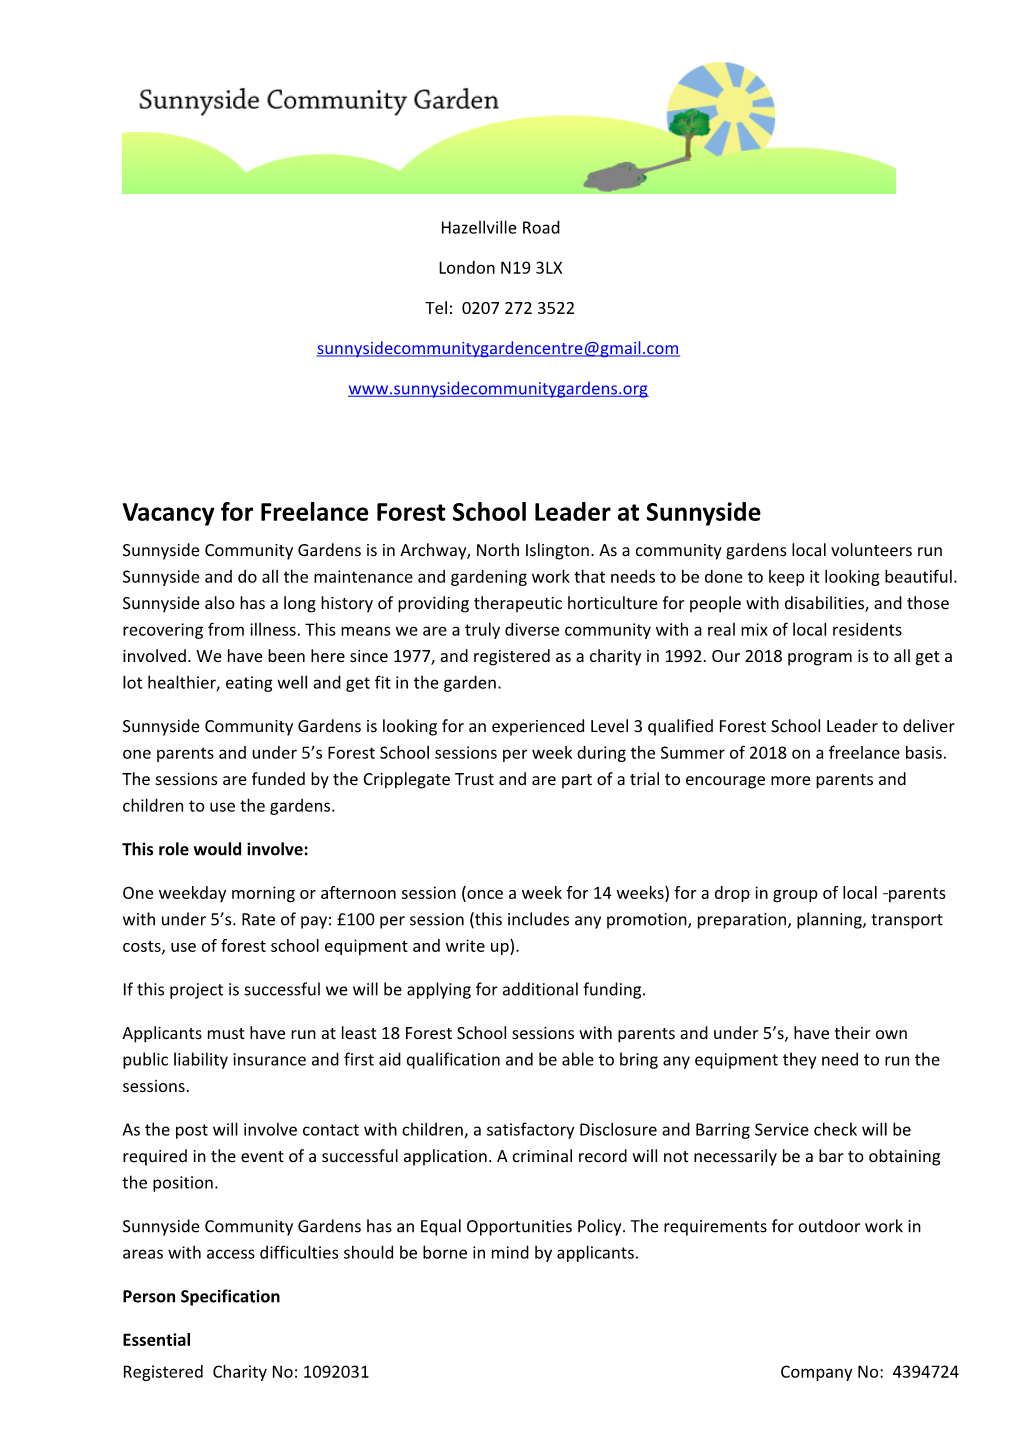 Vacancy for Freelance Forest School Leader at Sunnyside